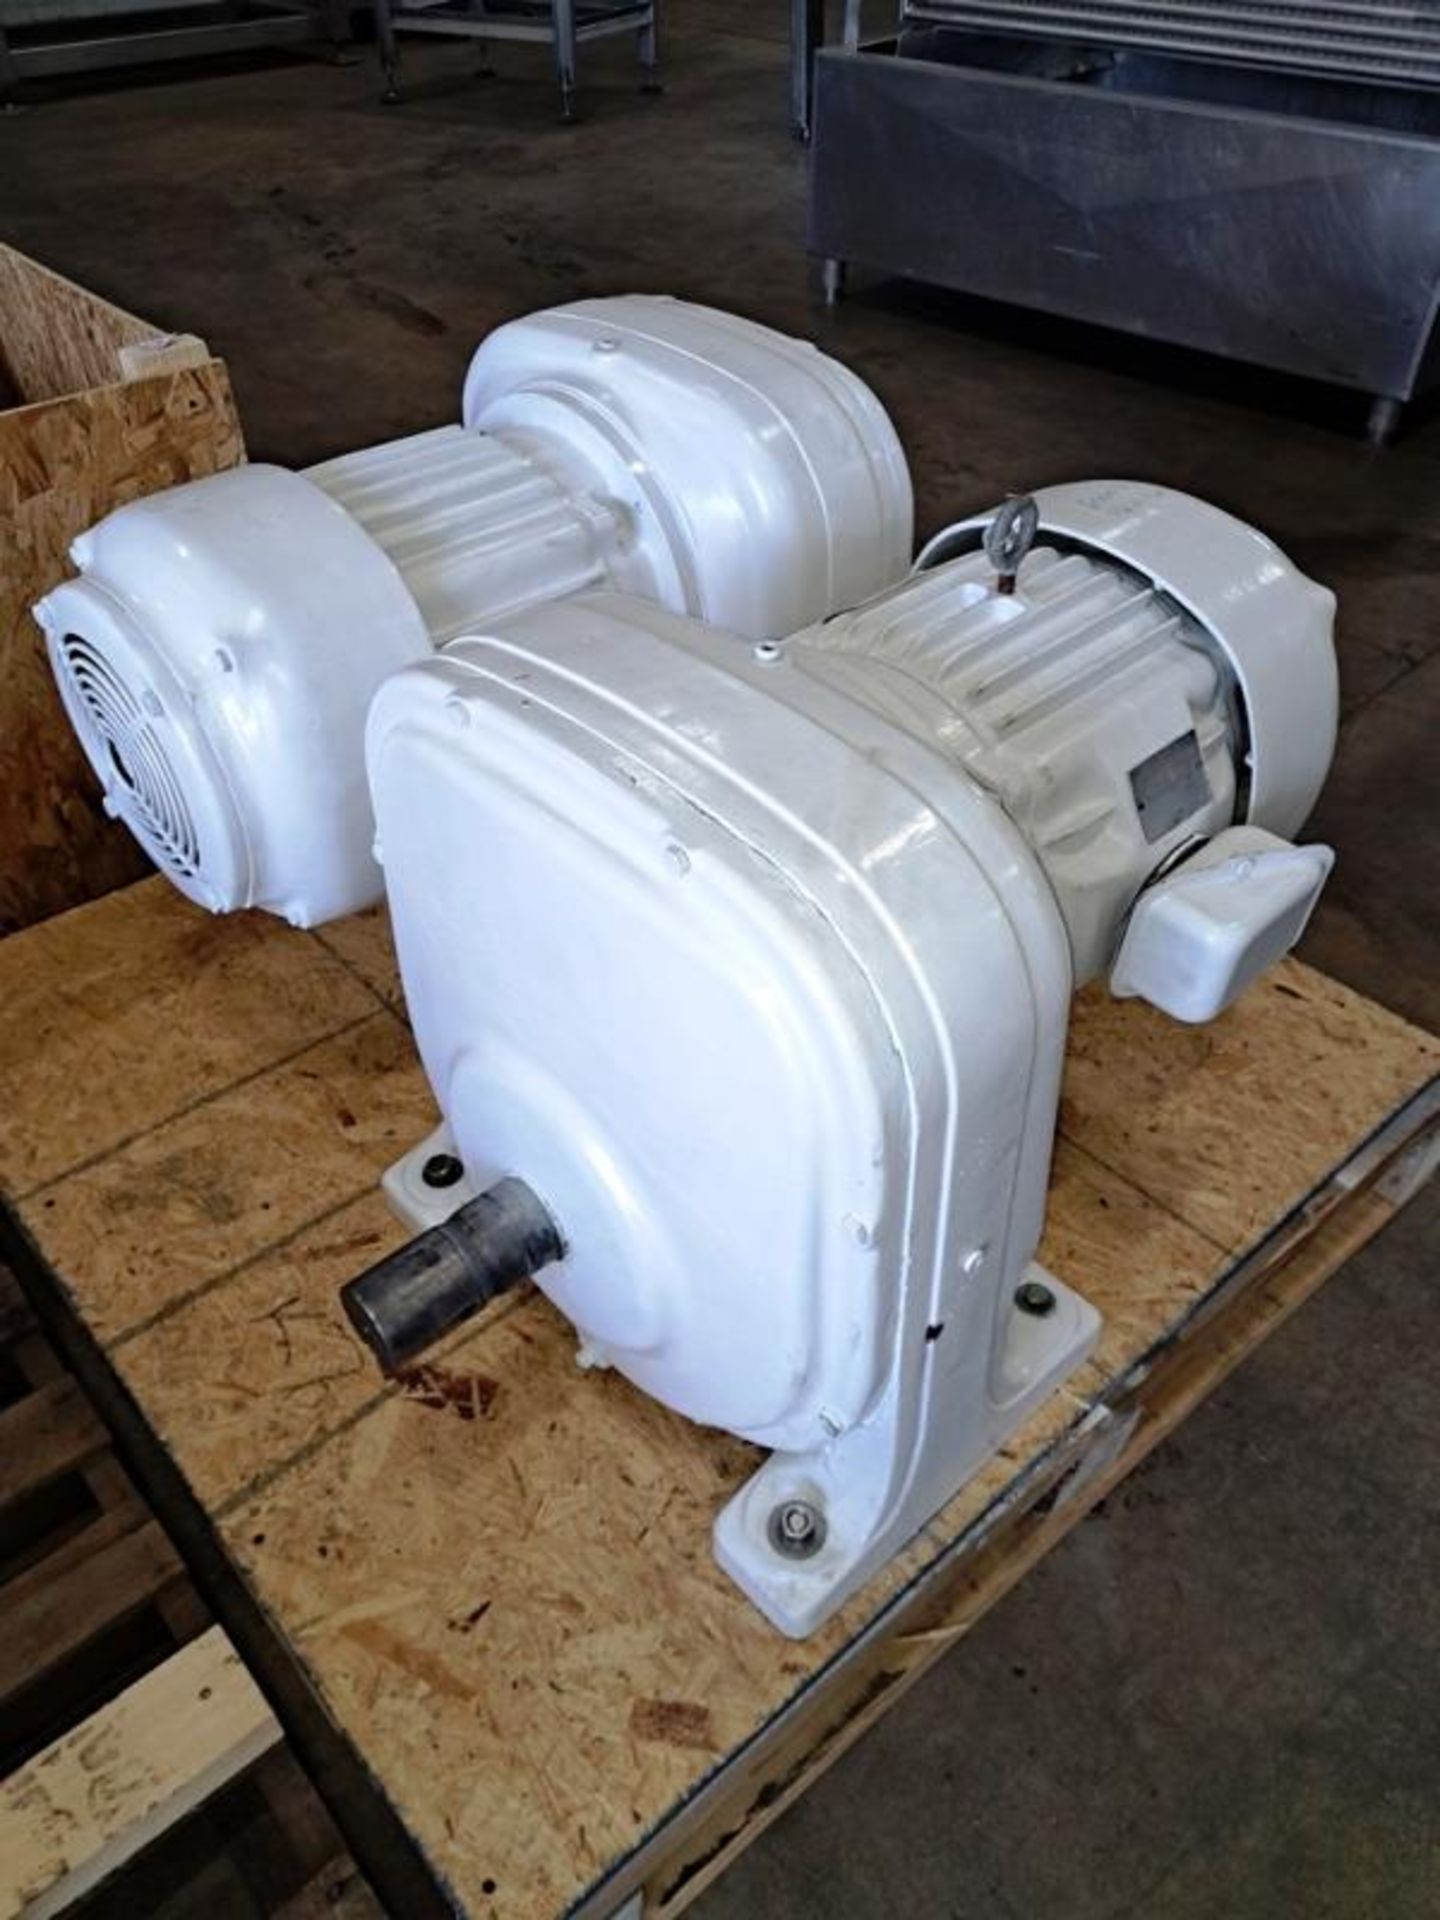 Lot of (2) Rebuilt 100 H.P. Motors and Gearboxes, 230/460 volts, 3 phase, approximately 2-9/16"